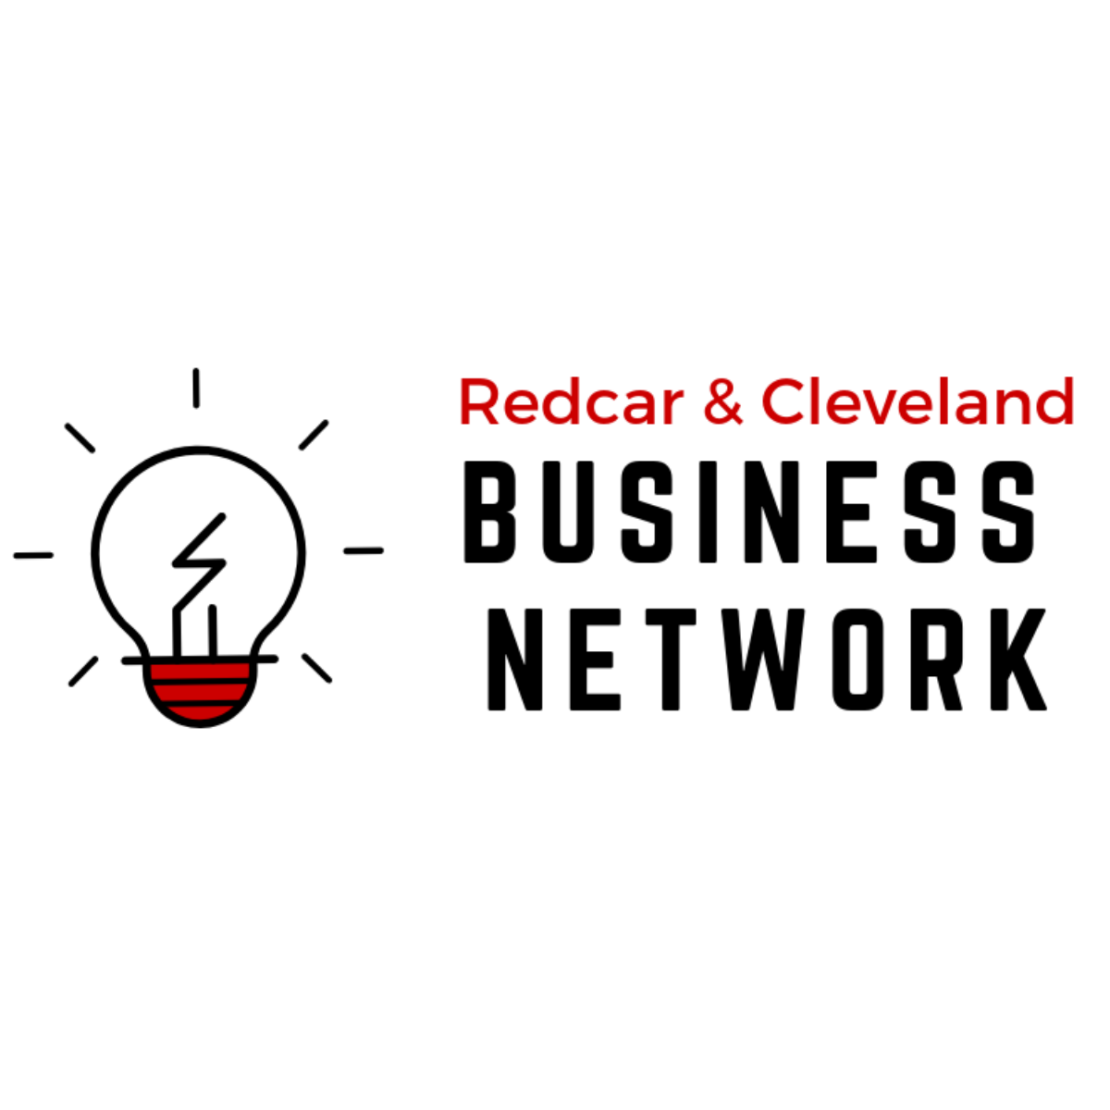 Redcar & Cleveland Business Network